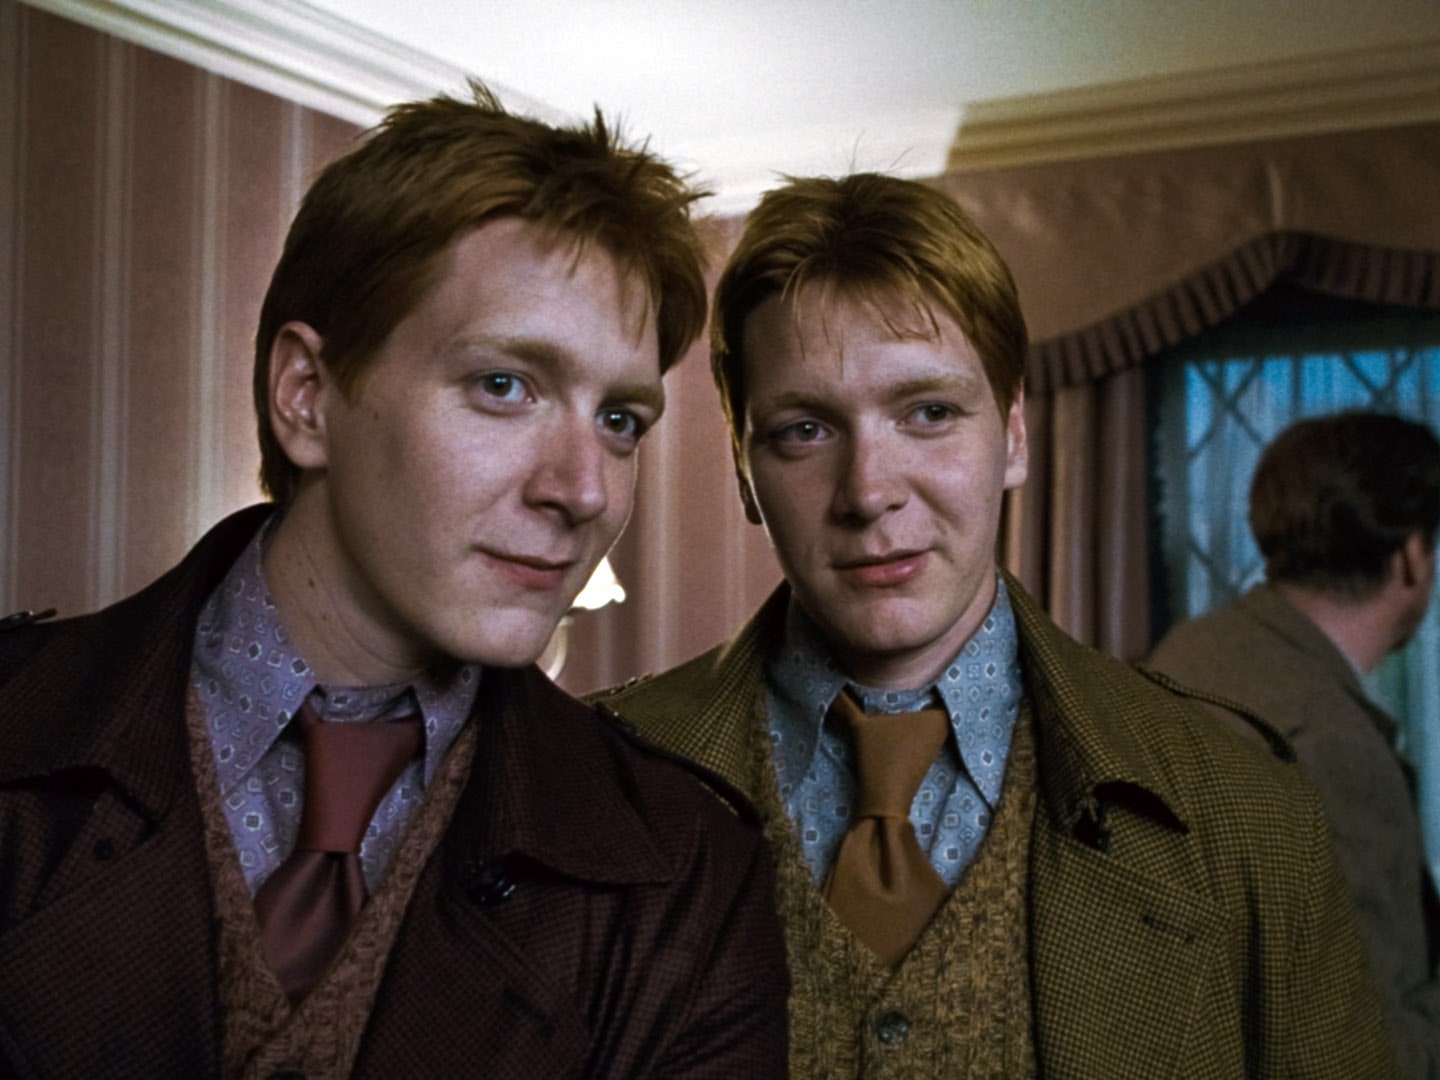 Who Played Fred And George Weasley In The Harry Potter Franchise?